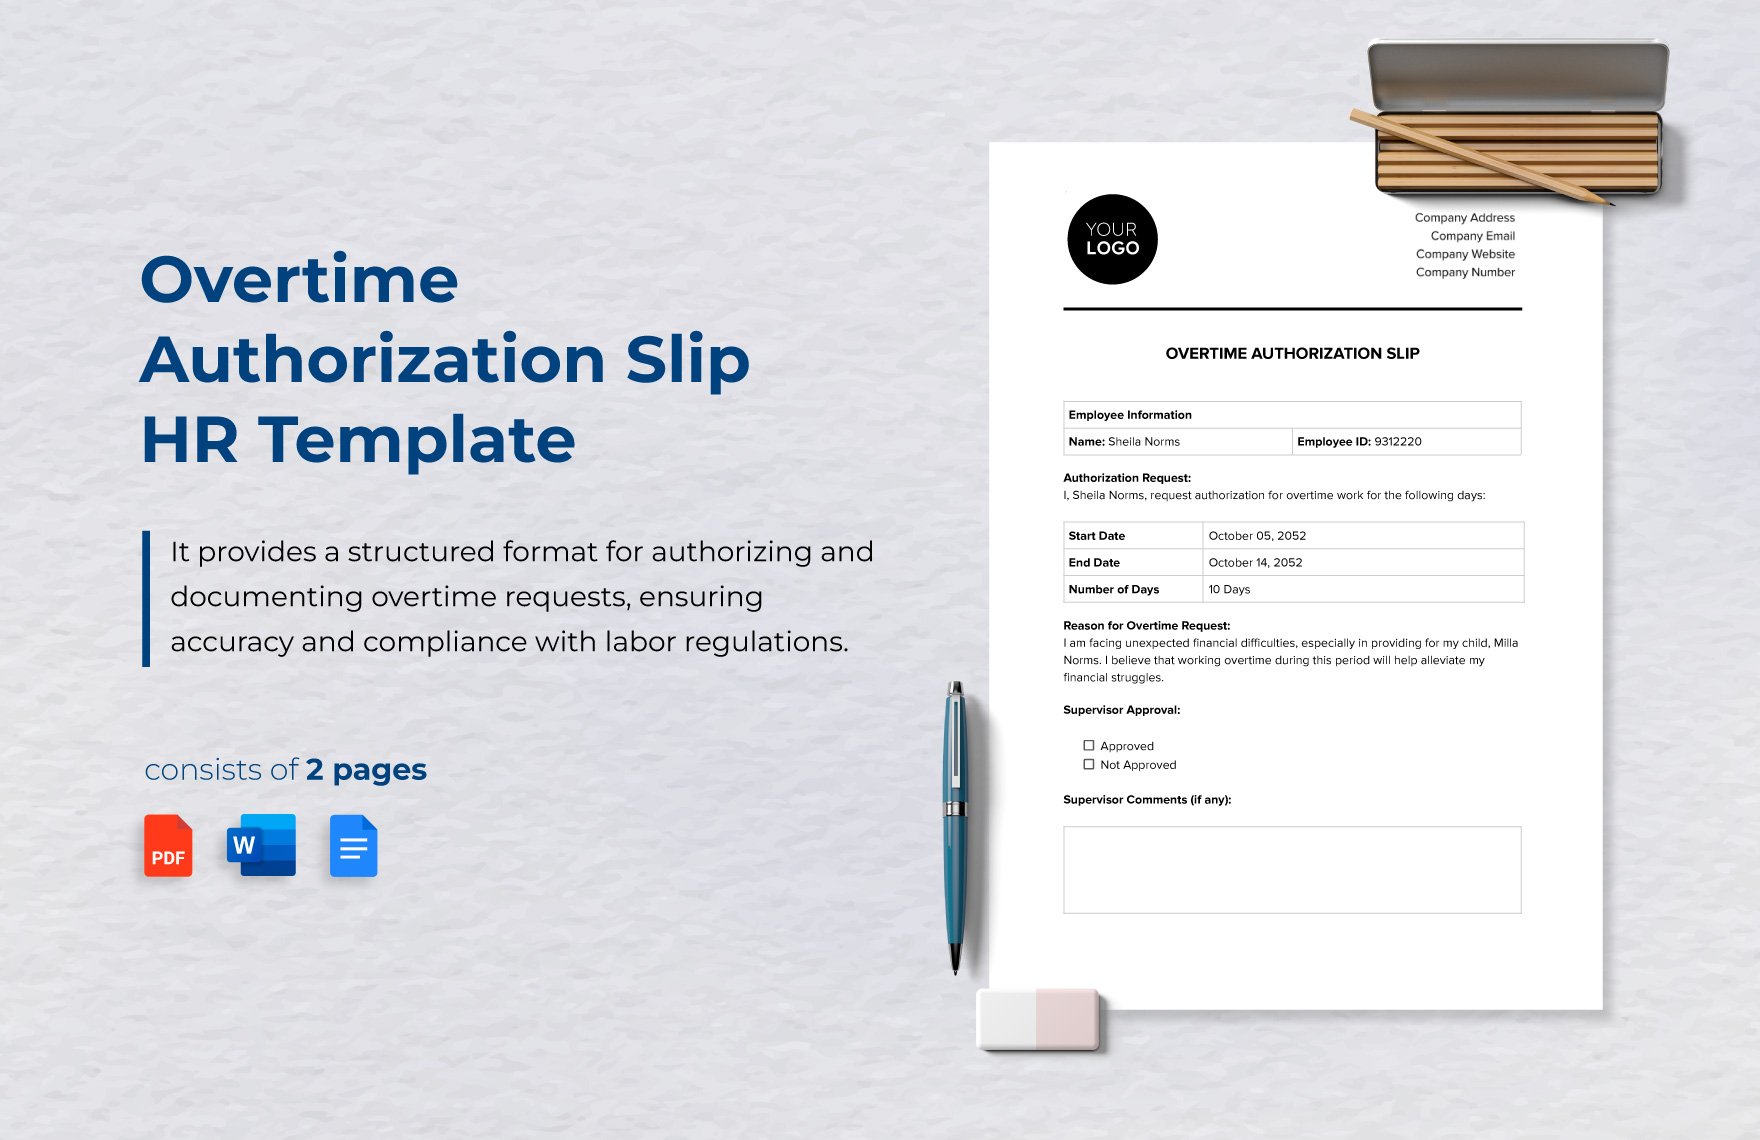 Overtime Authorization Slip HR Template in Word, Google Docs, PDF